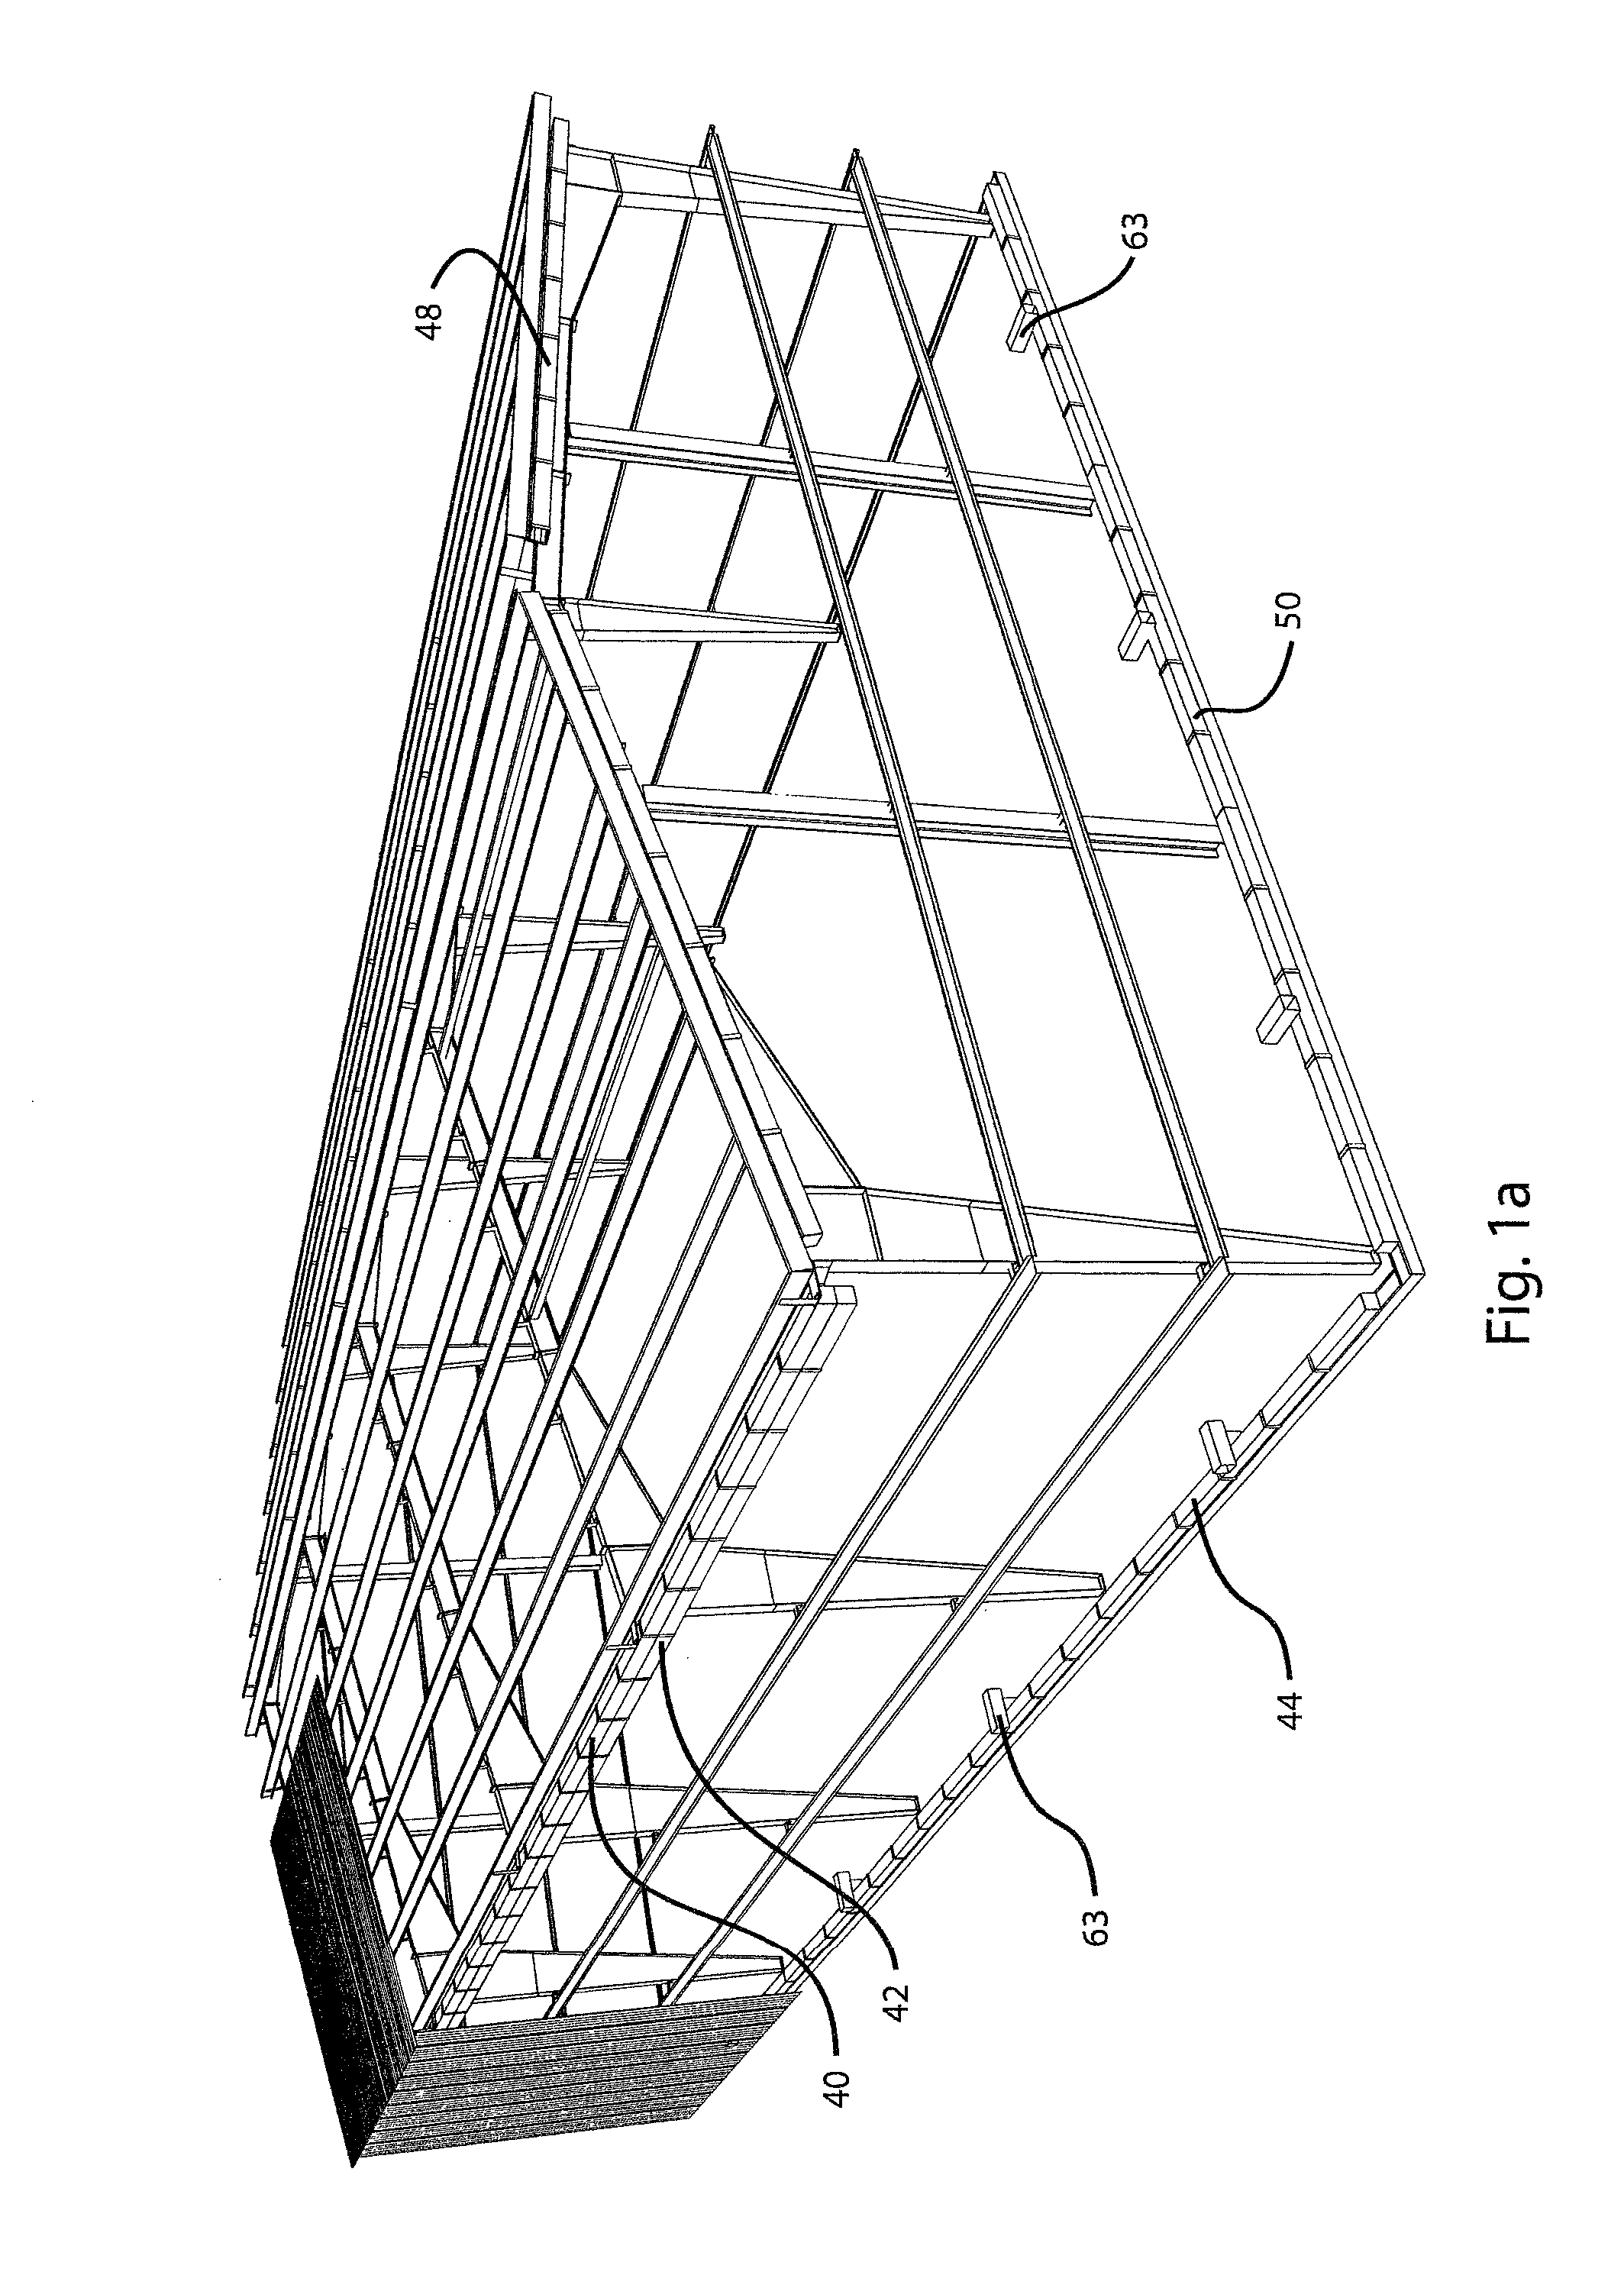 Building insulation system